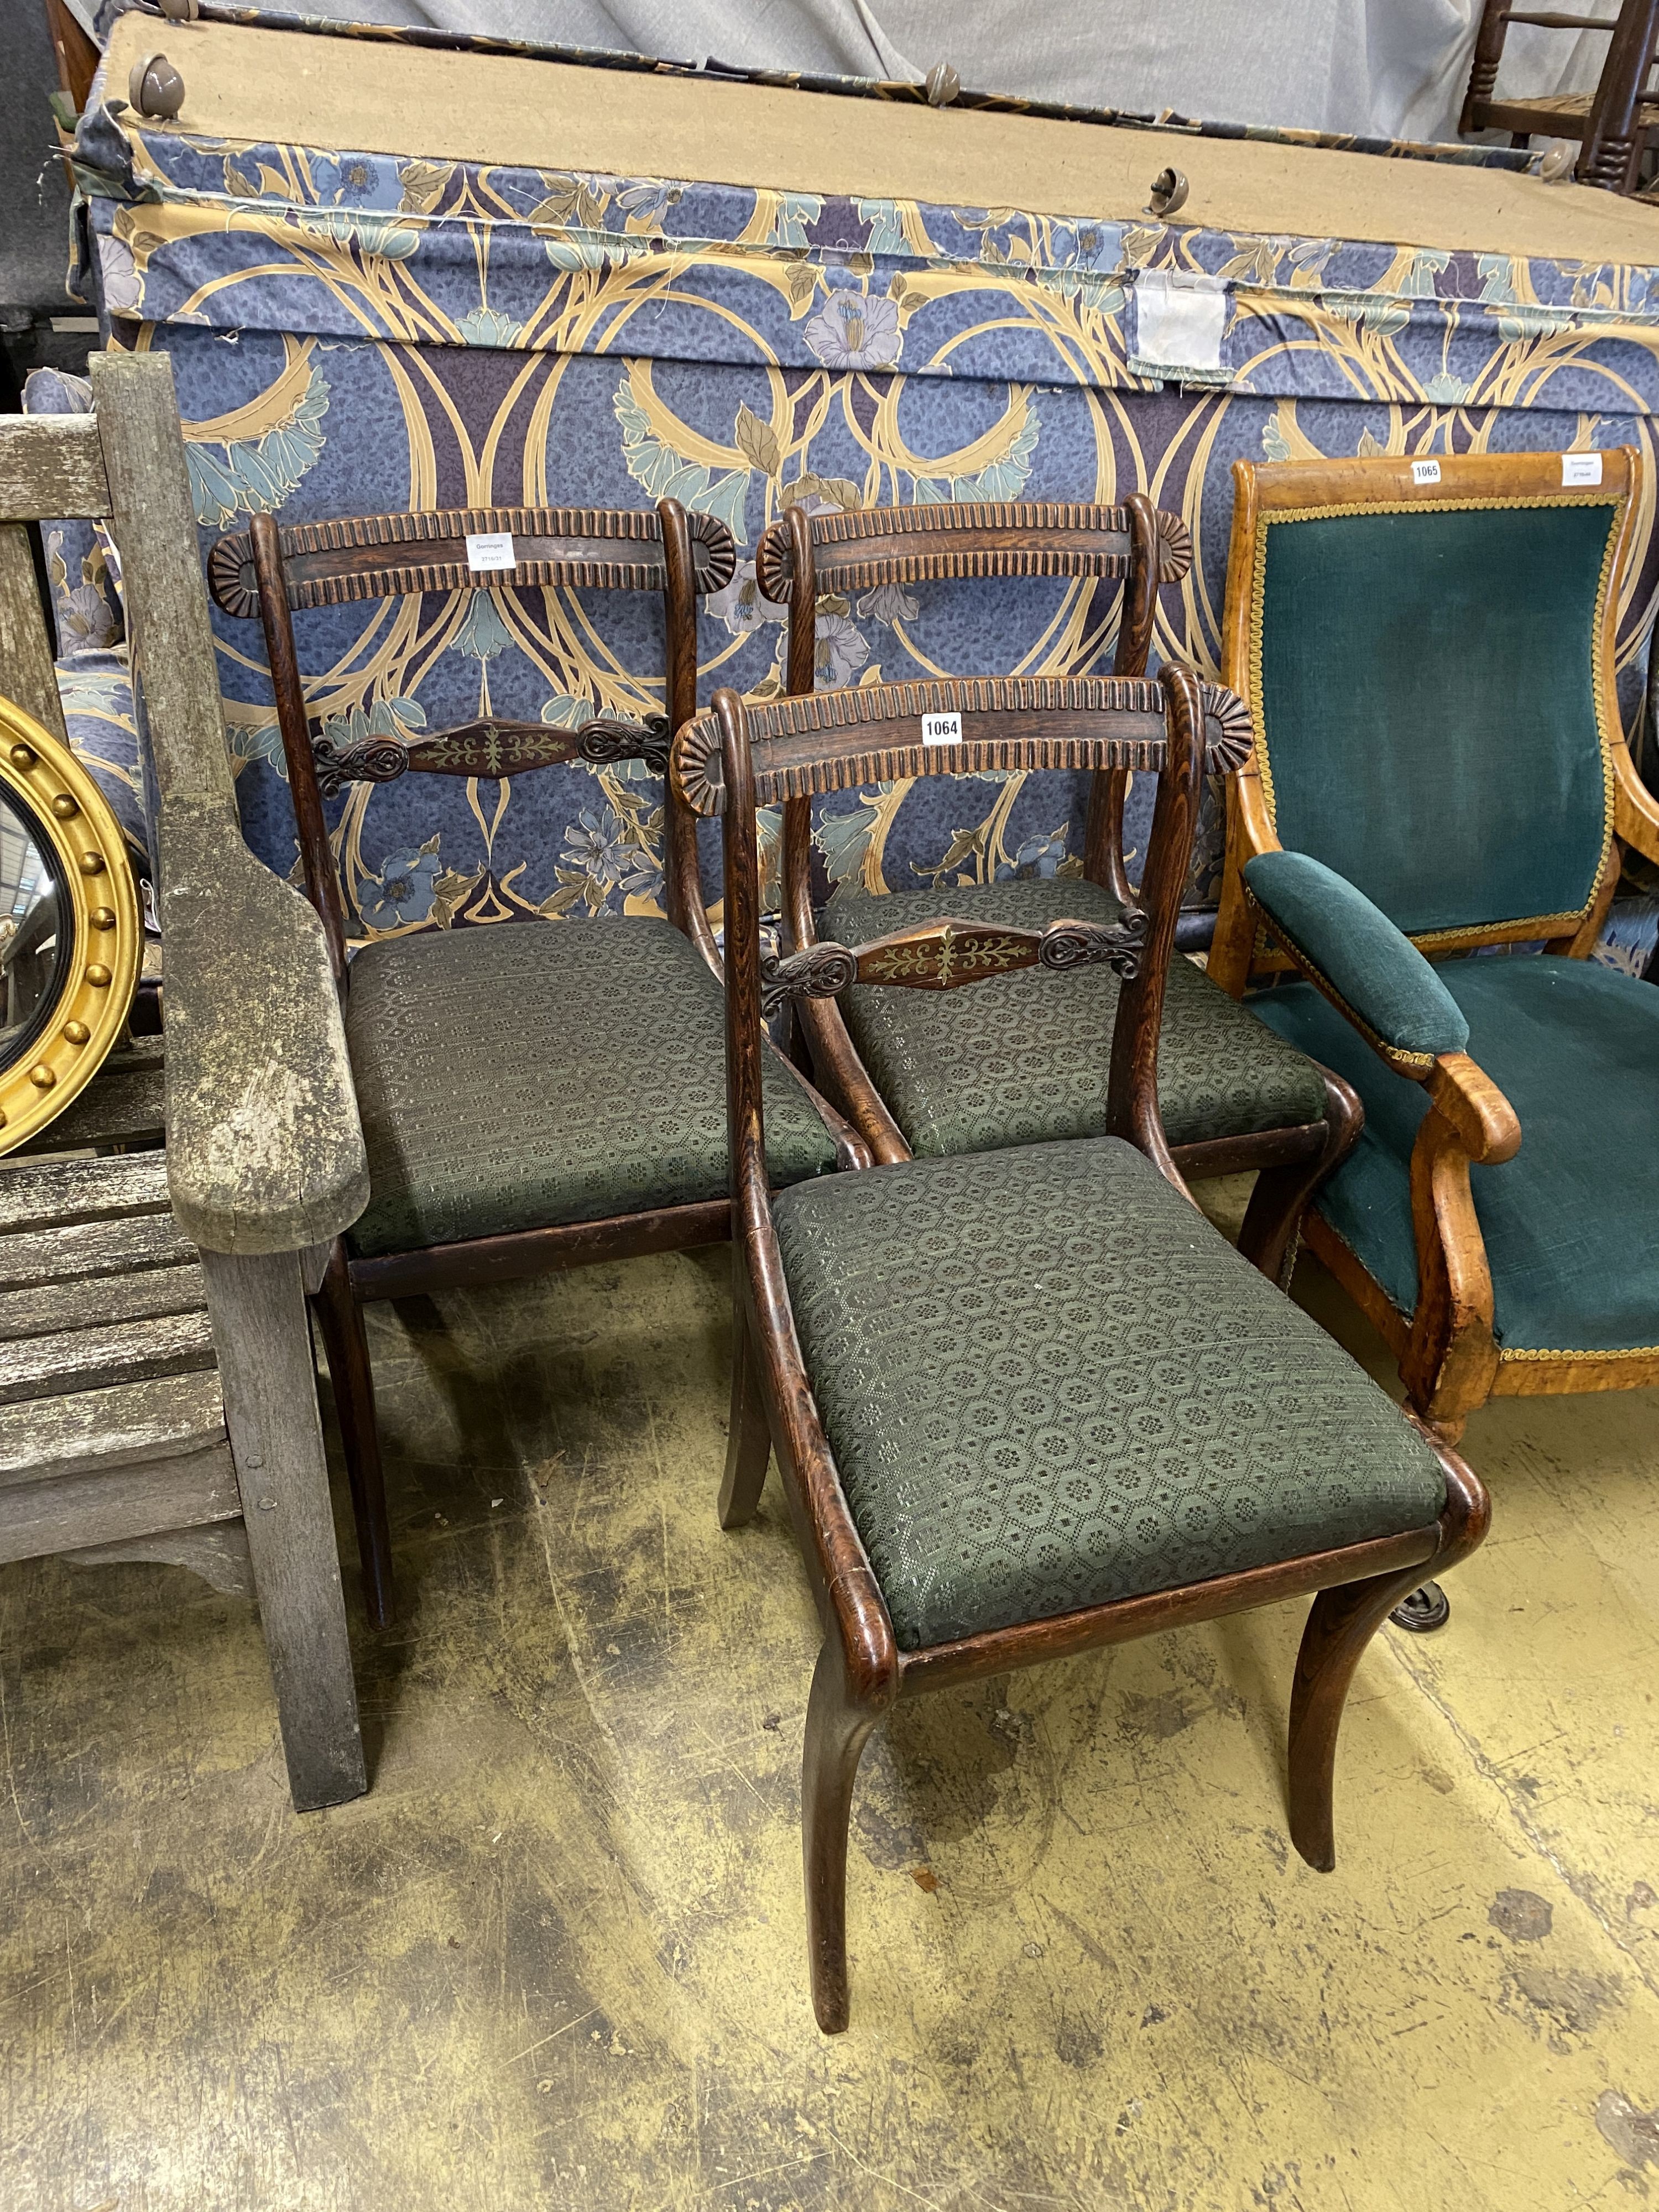 A set of three Regency simulated rosewood dining chairs, with brass-inlaid rails and sabre legs - Image 2 of 2